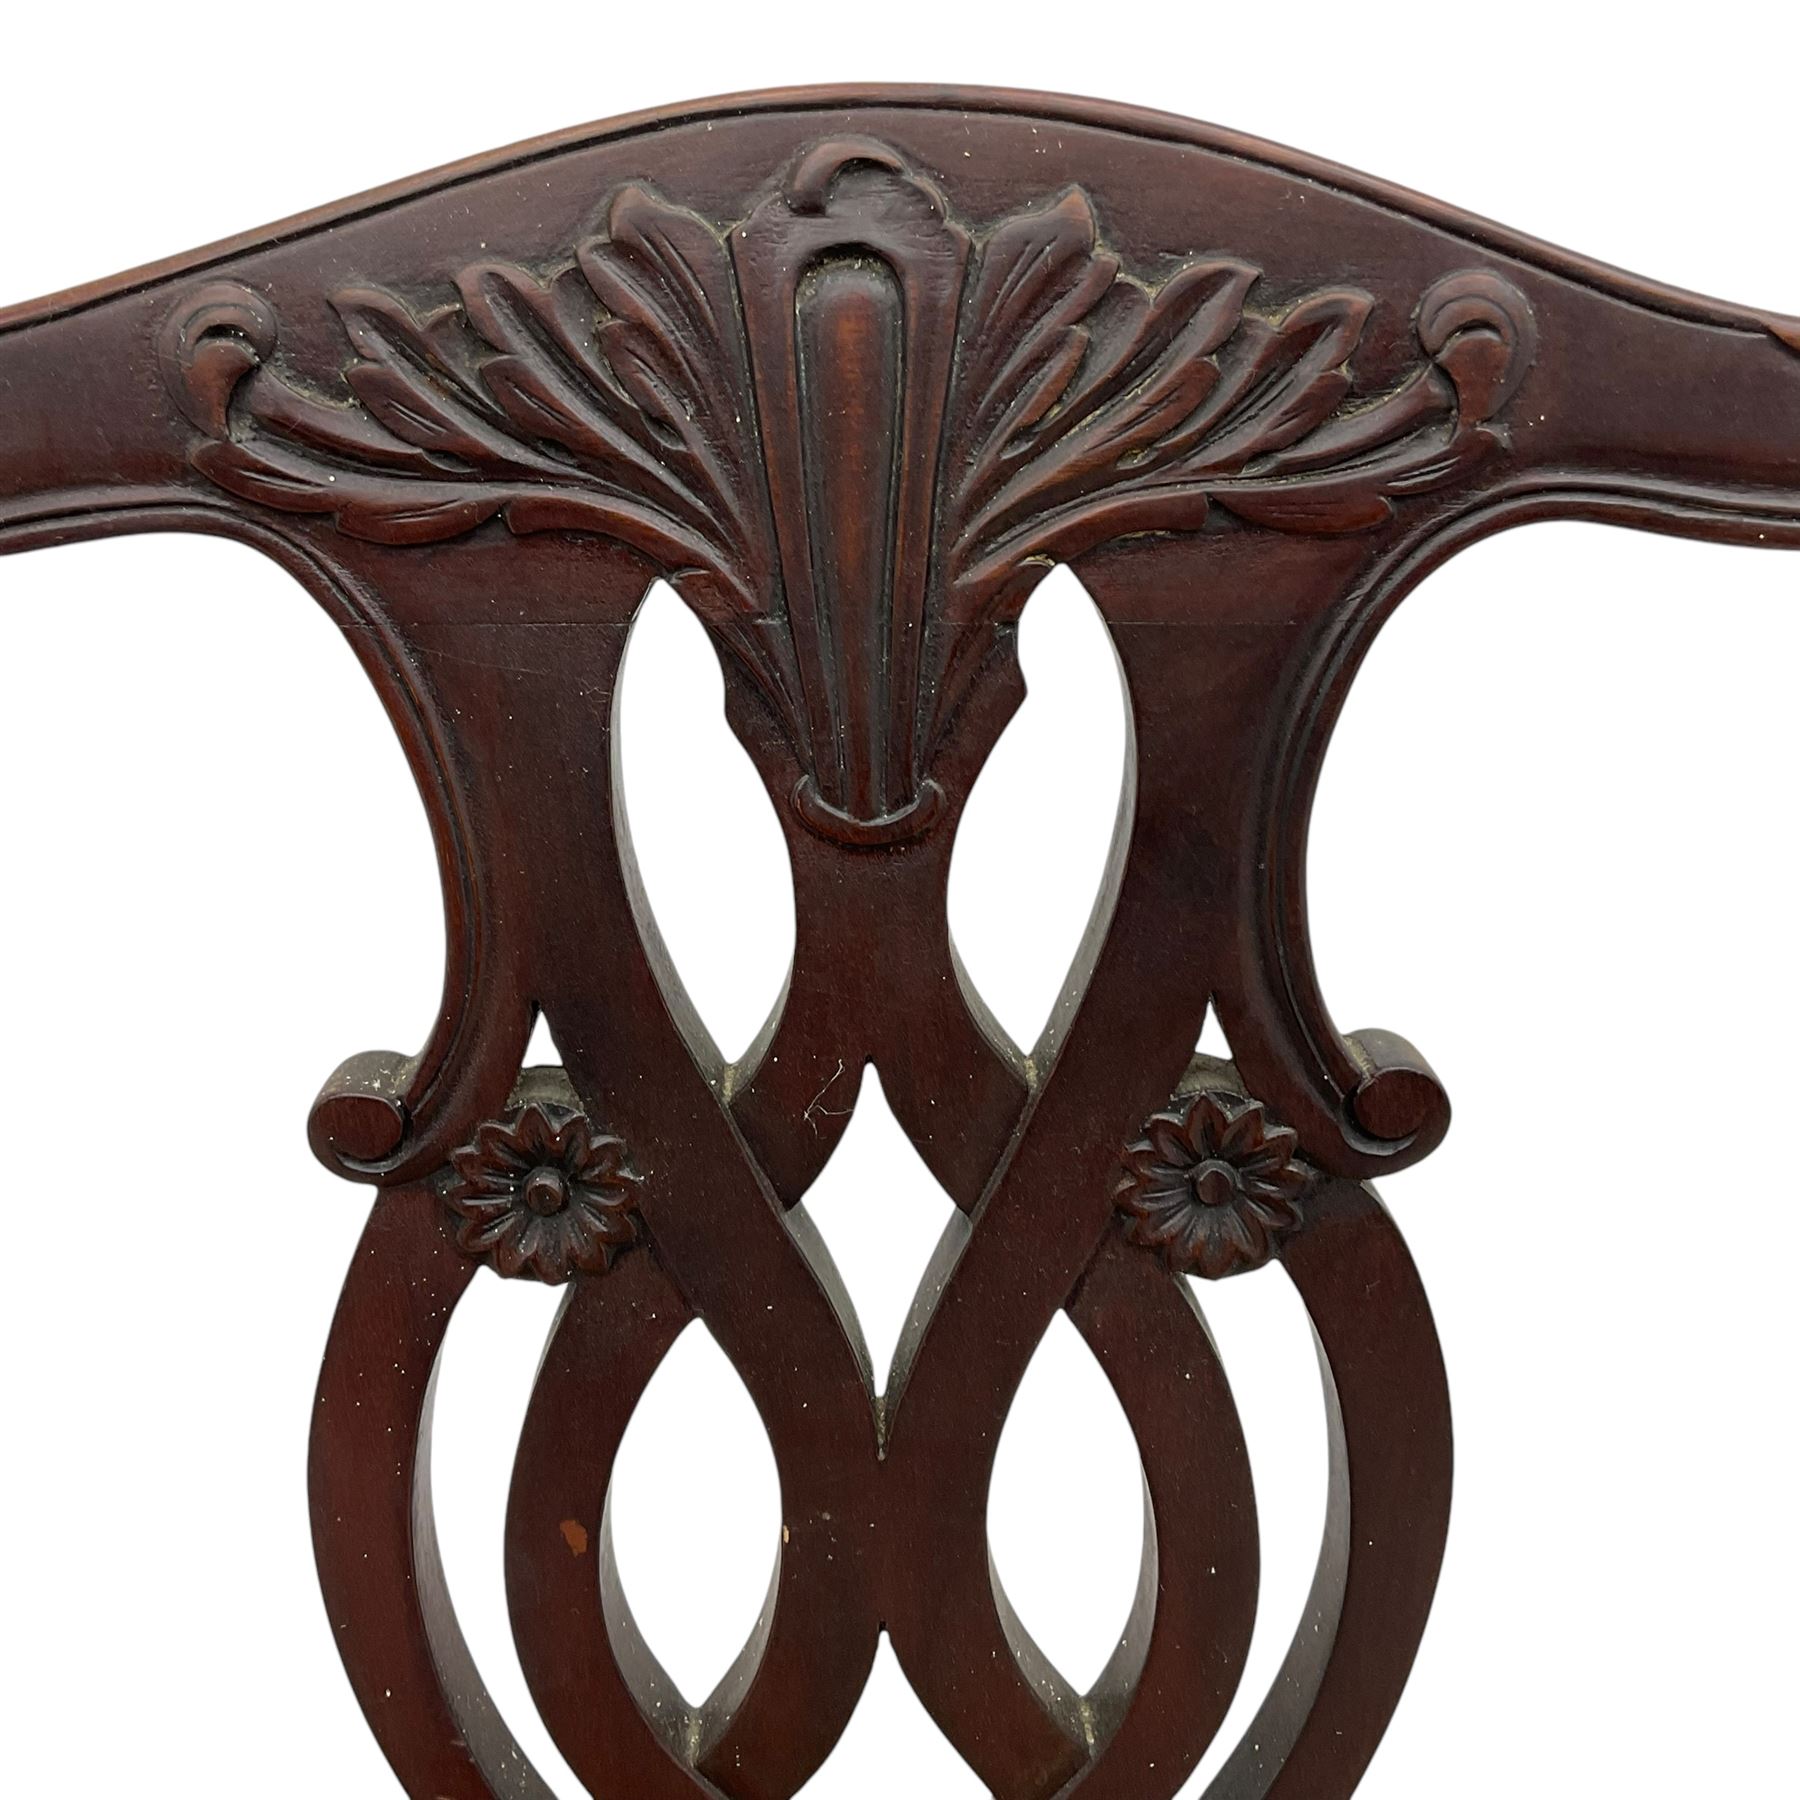 Set of eight (6+2) early 20th century Chippendale design mahogany dining chairs - Image 9 of 14